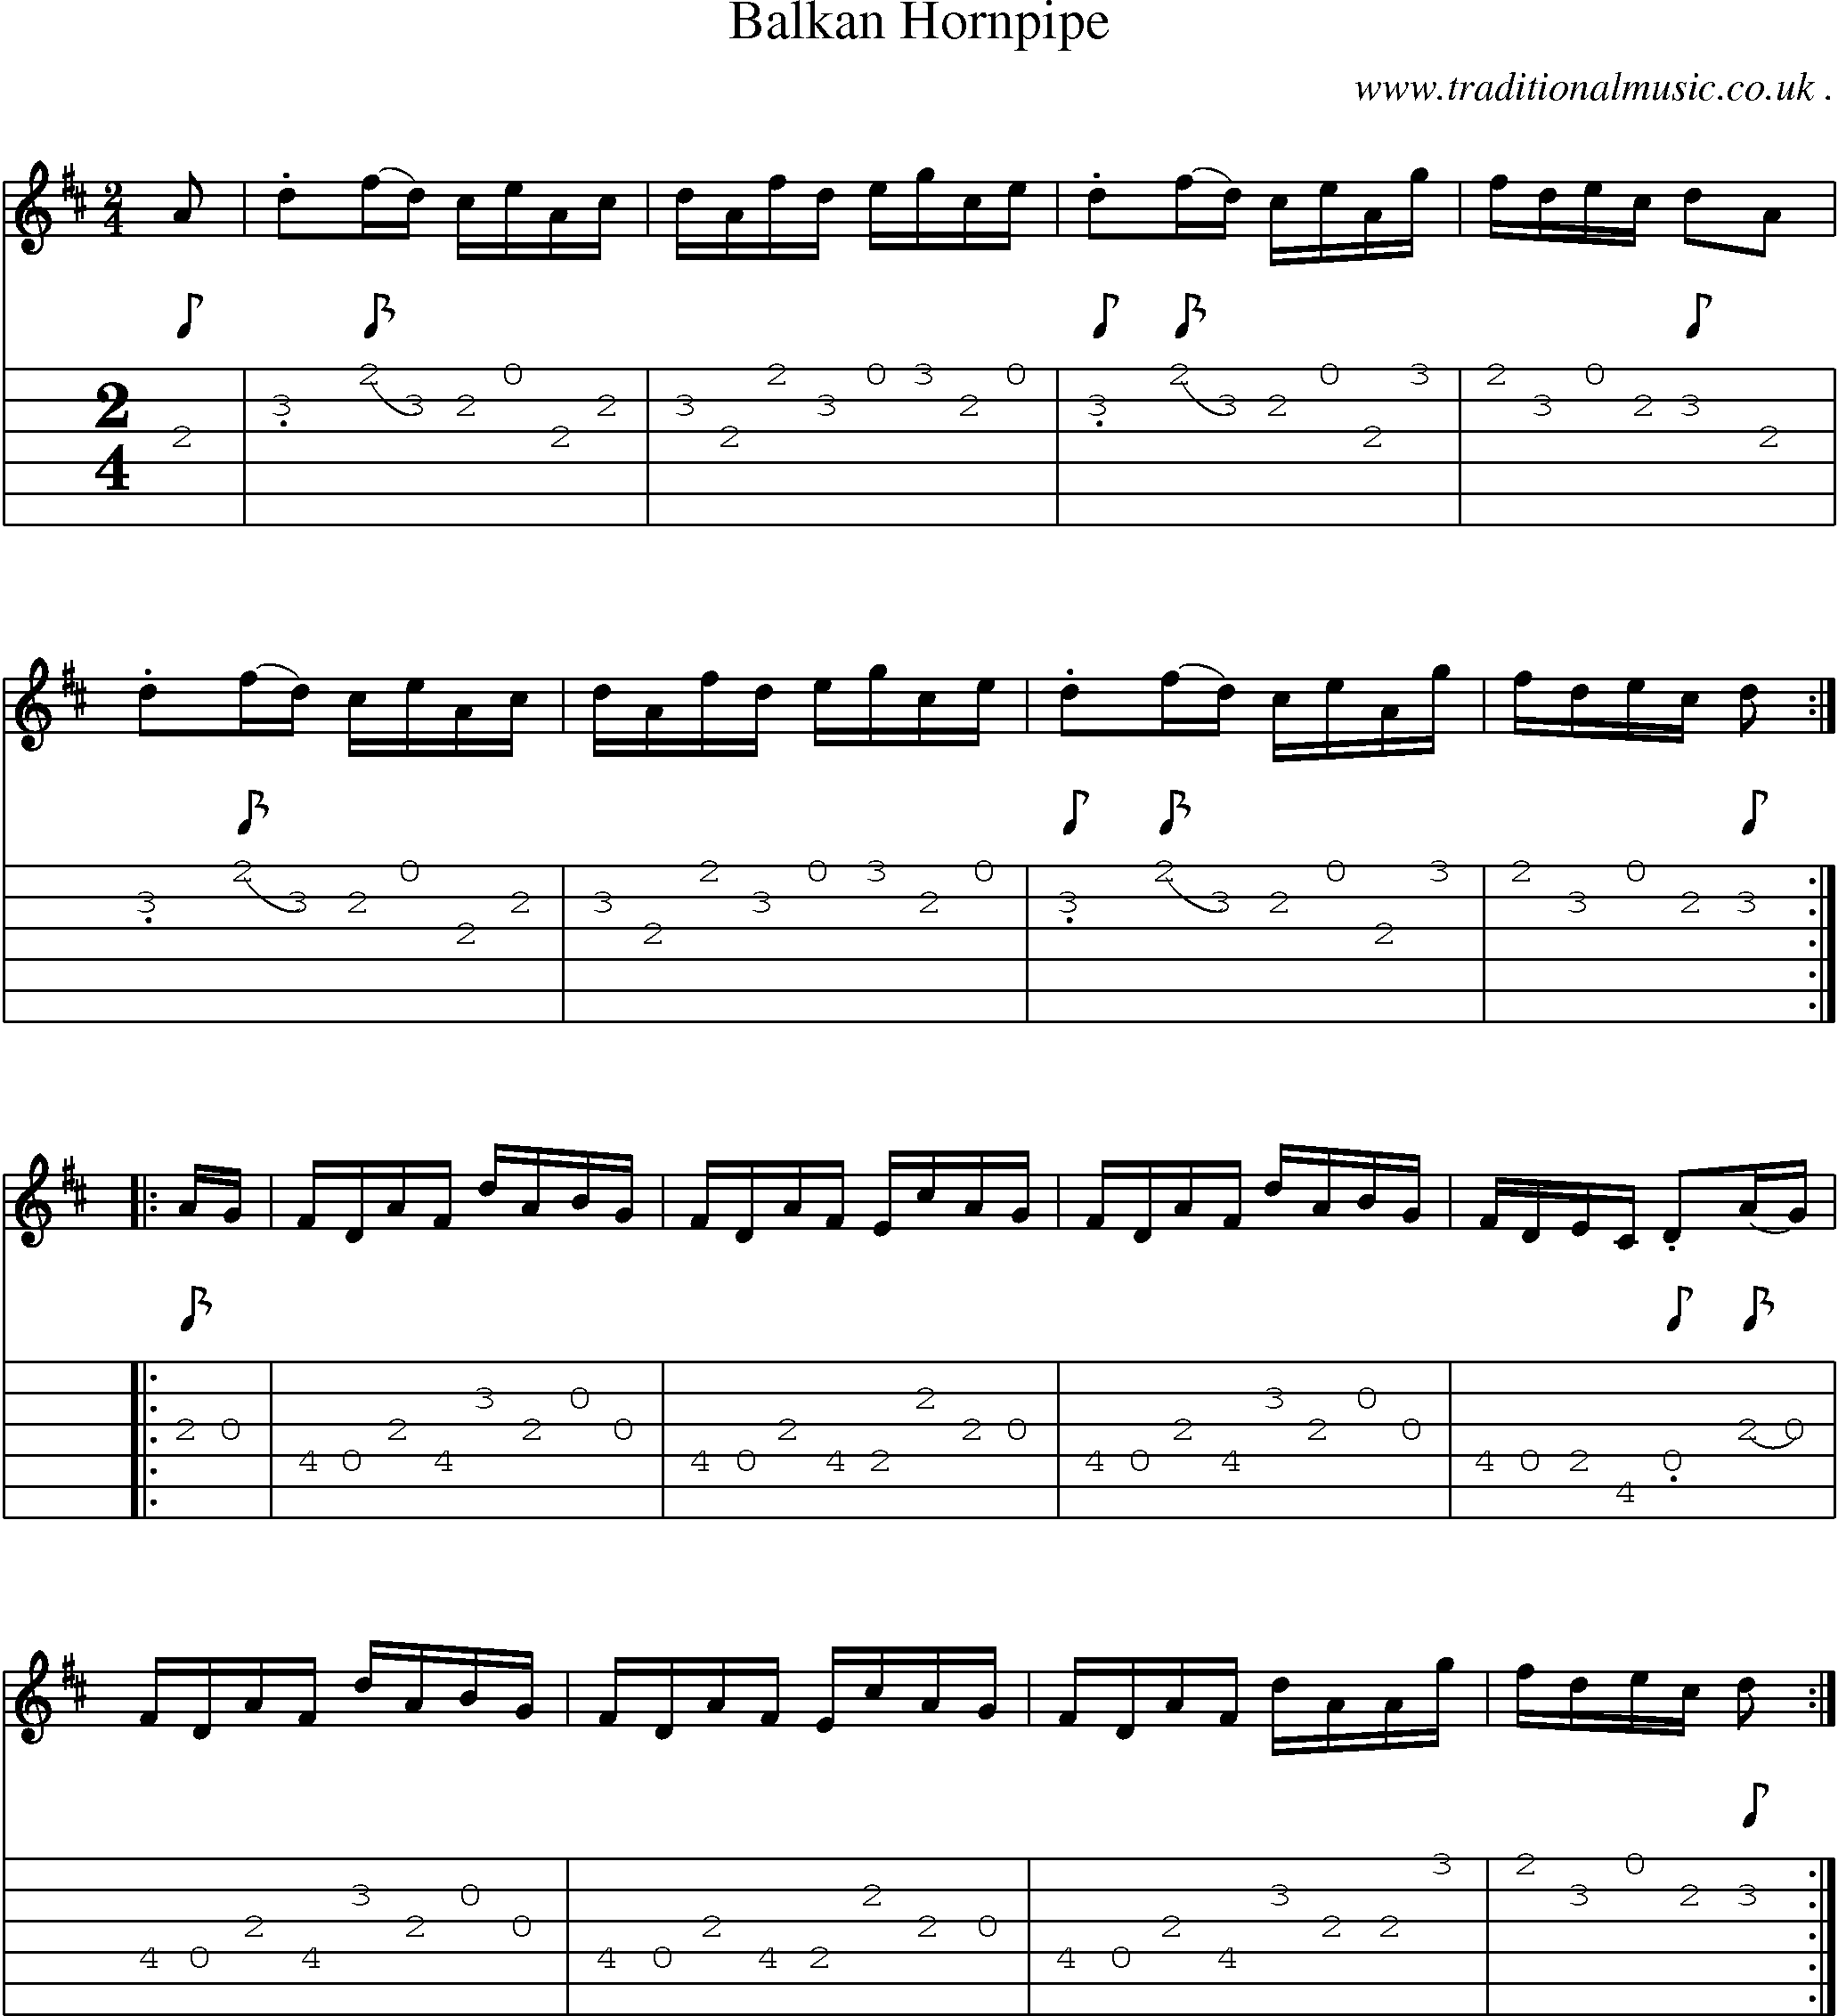 Sheet-Music and Guitar Tabs for Balkan Hornpipe